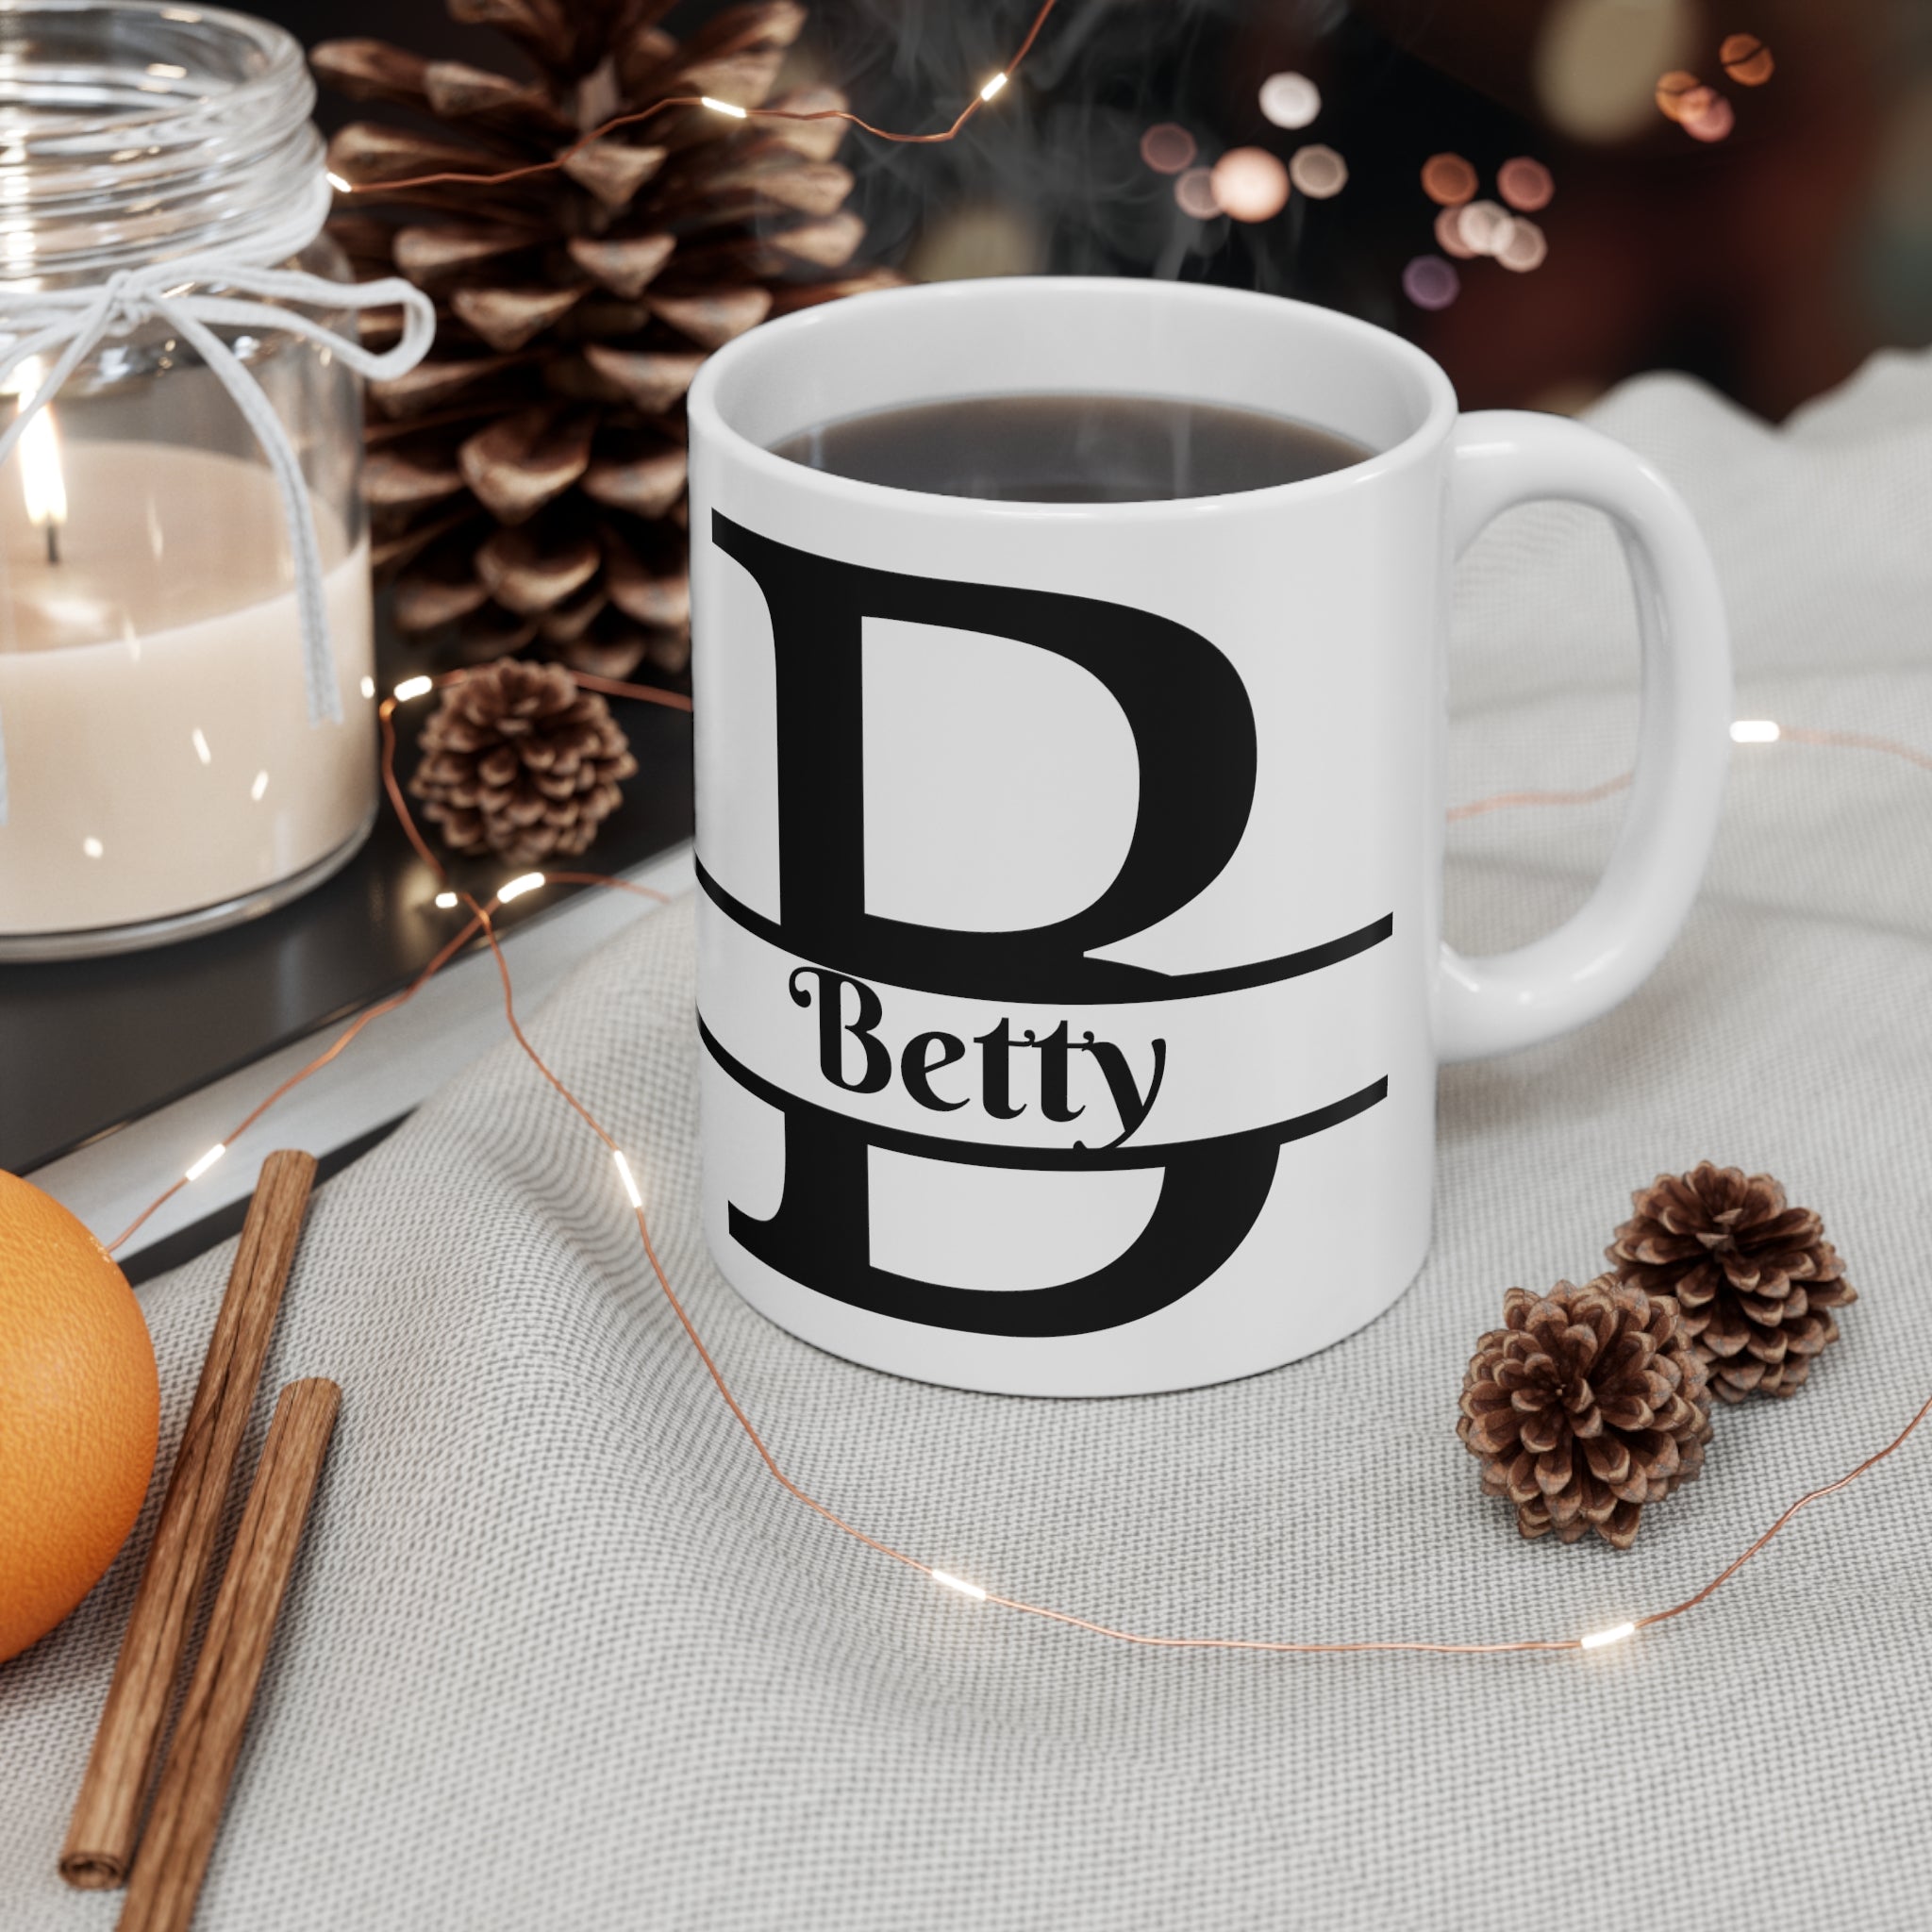 Personalized Ceramic Mug with Name and Initial